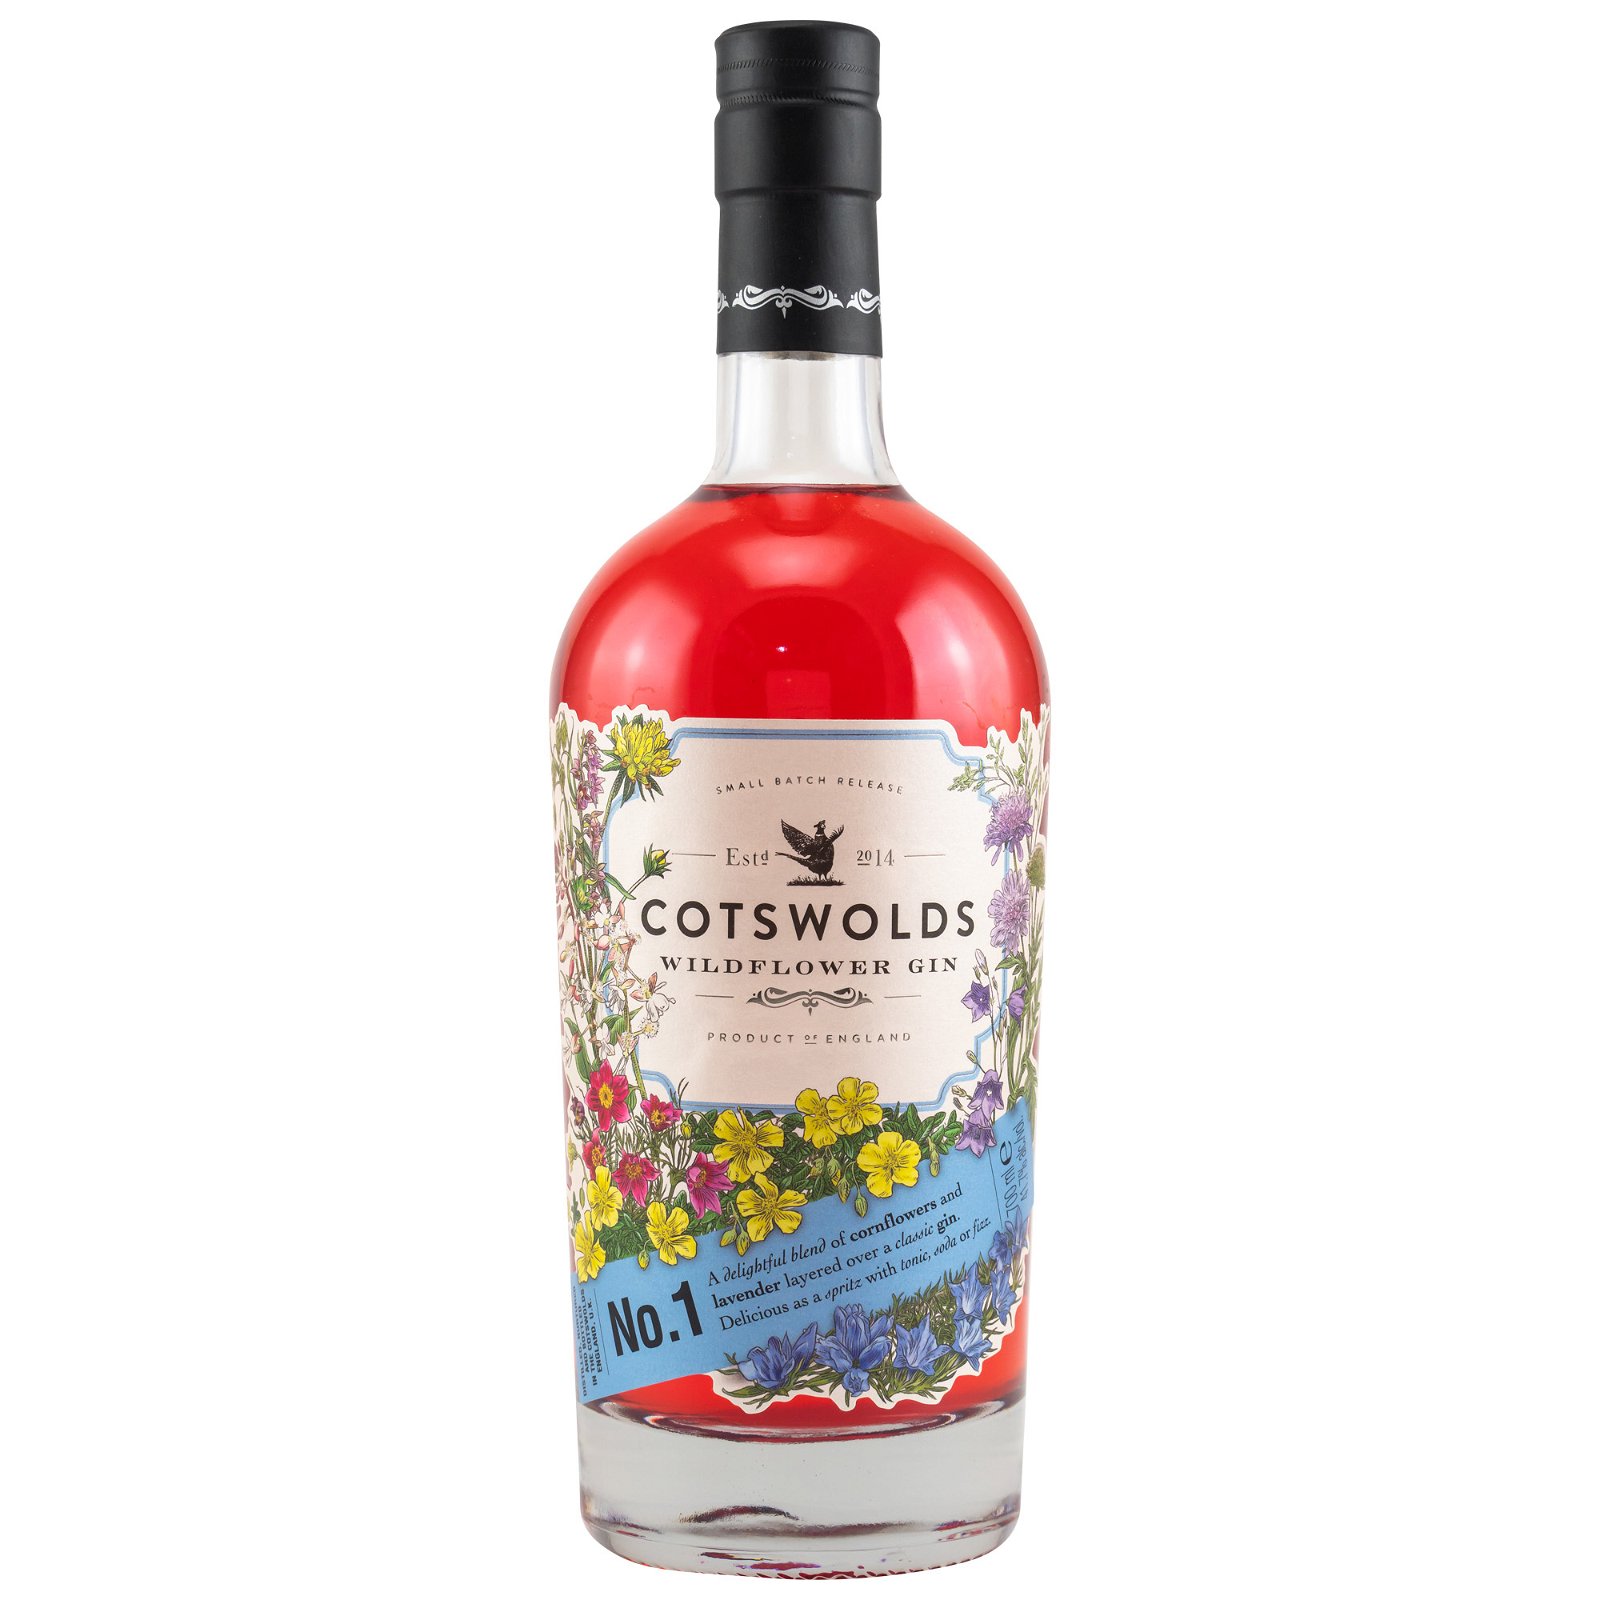 Cotswolds Wildflower Gin